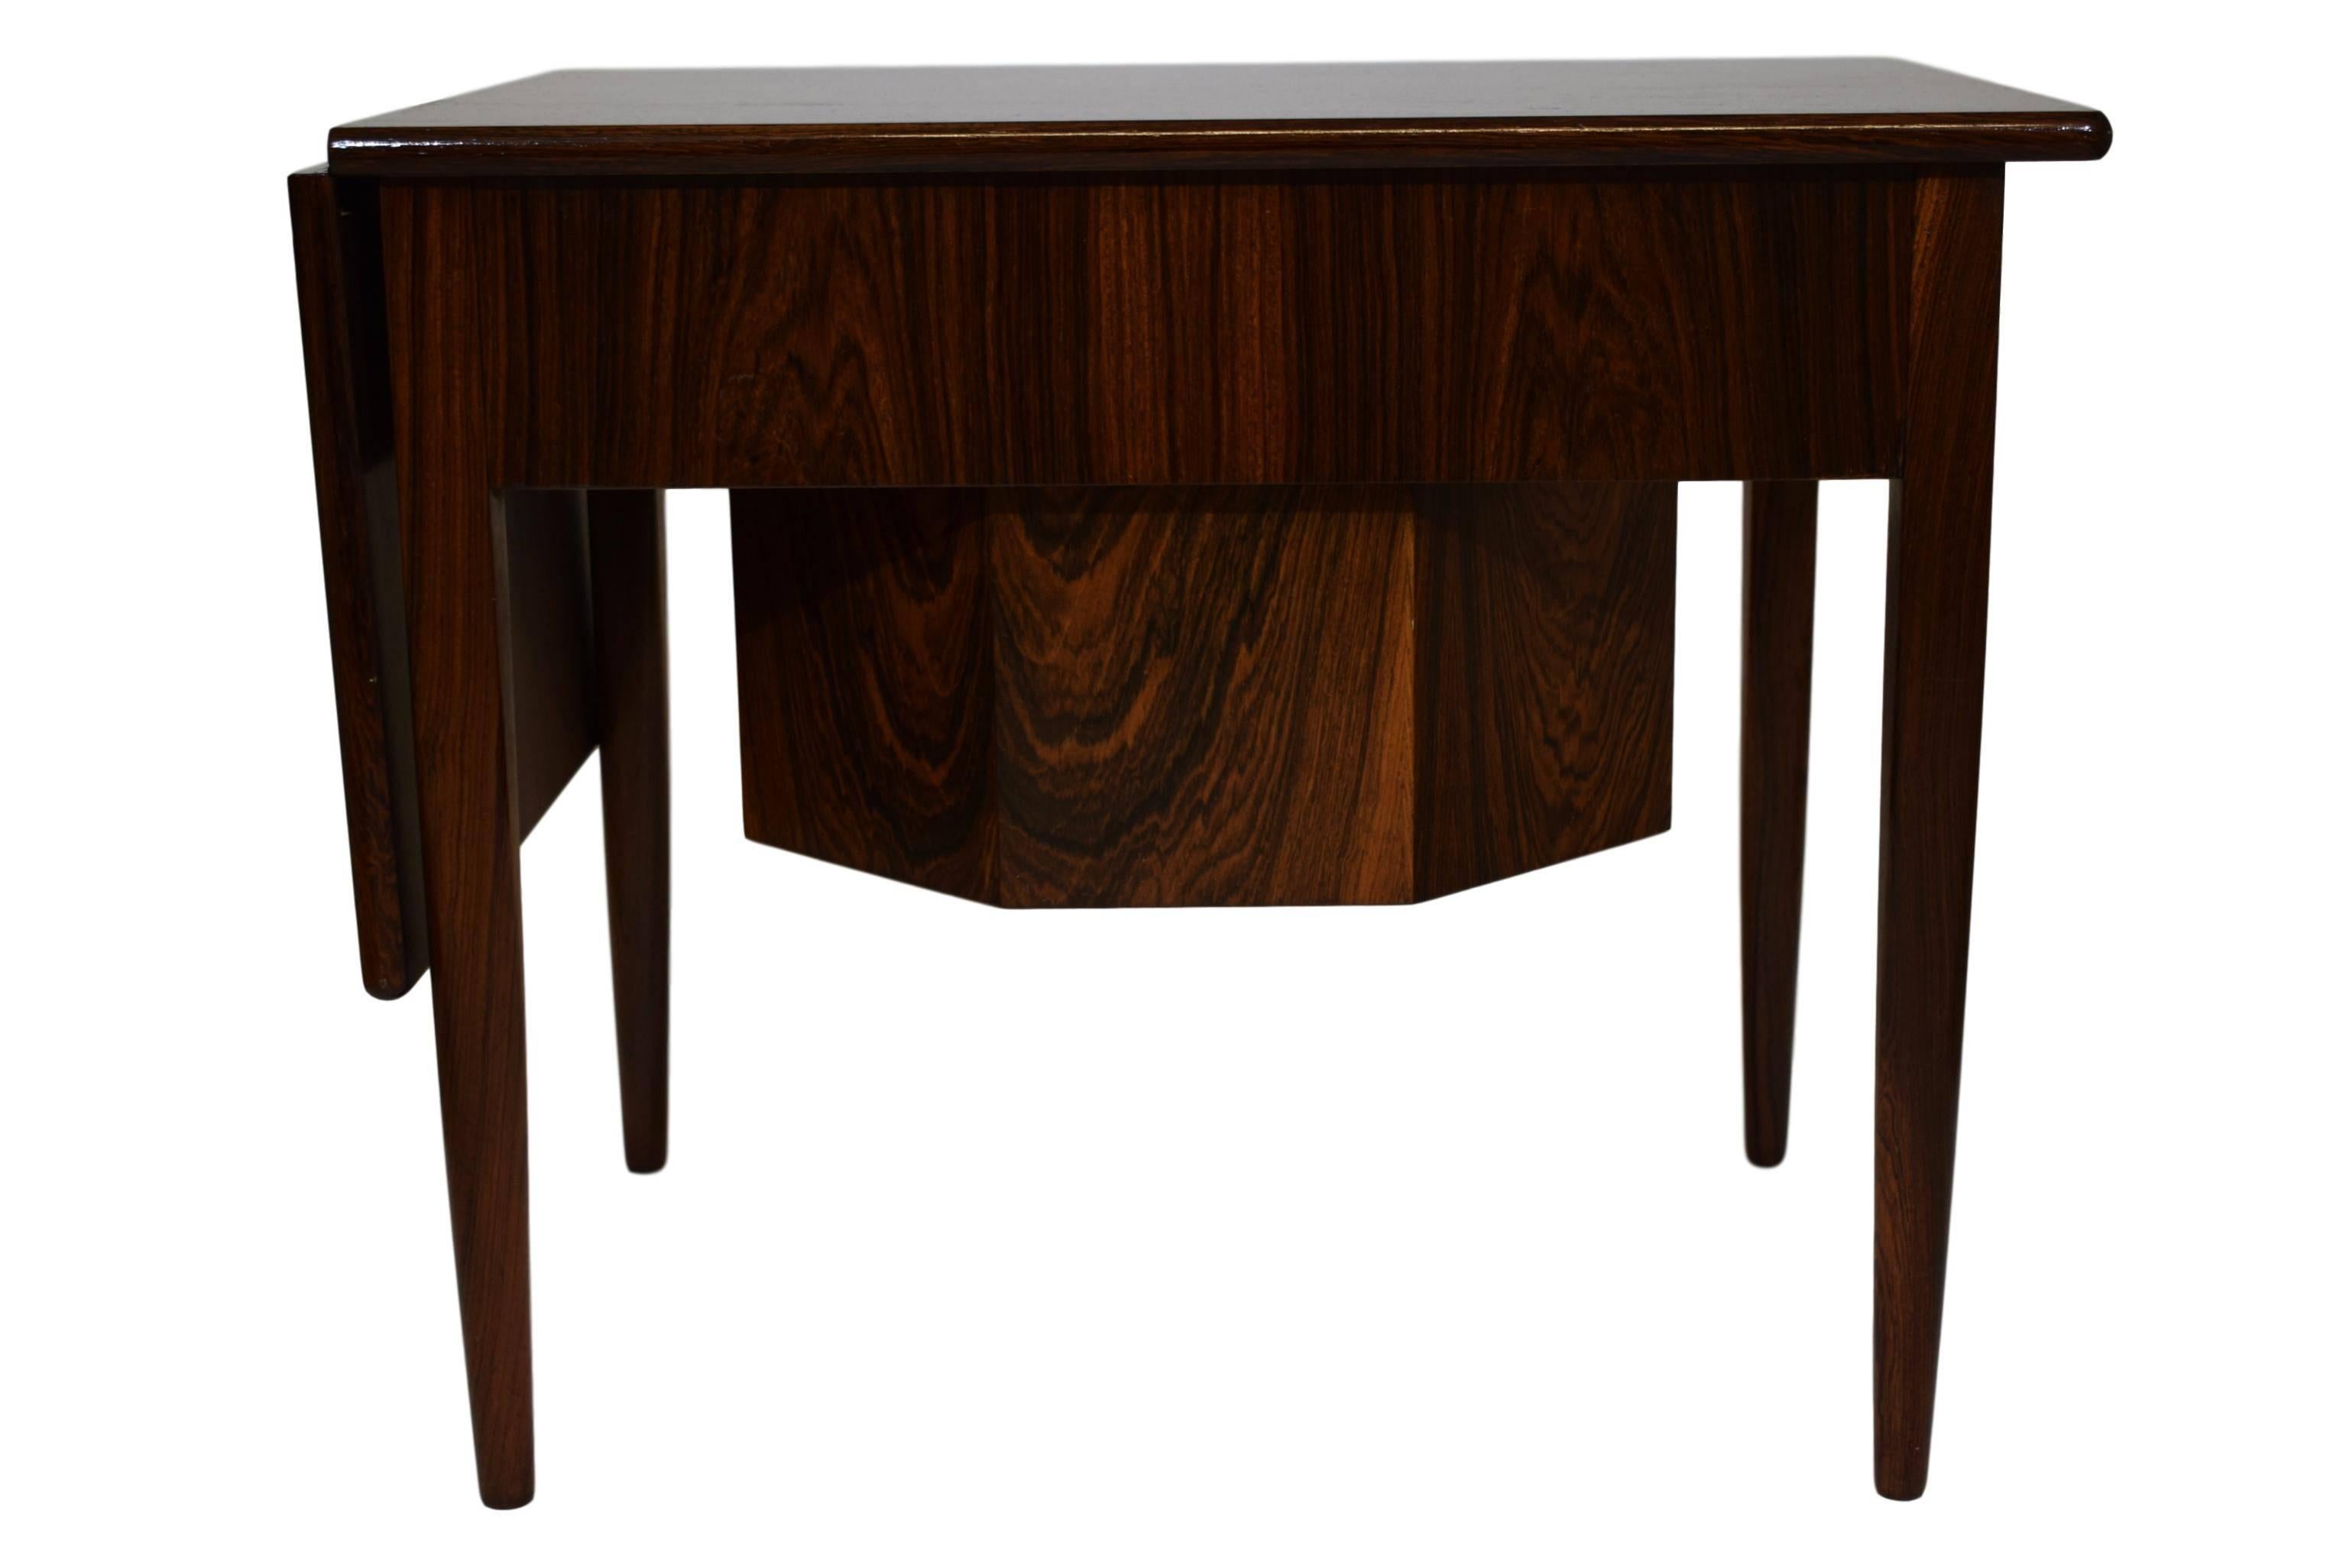 Danish Midcentury Sewing Table with Drop-Leaf by Johannes Andersen, Rosewood In Good Condition For Sale In Denmark, DK